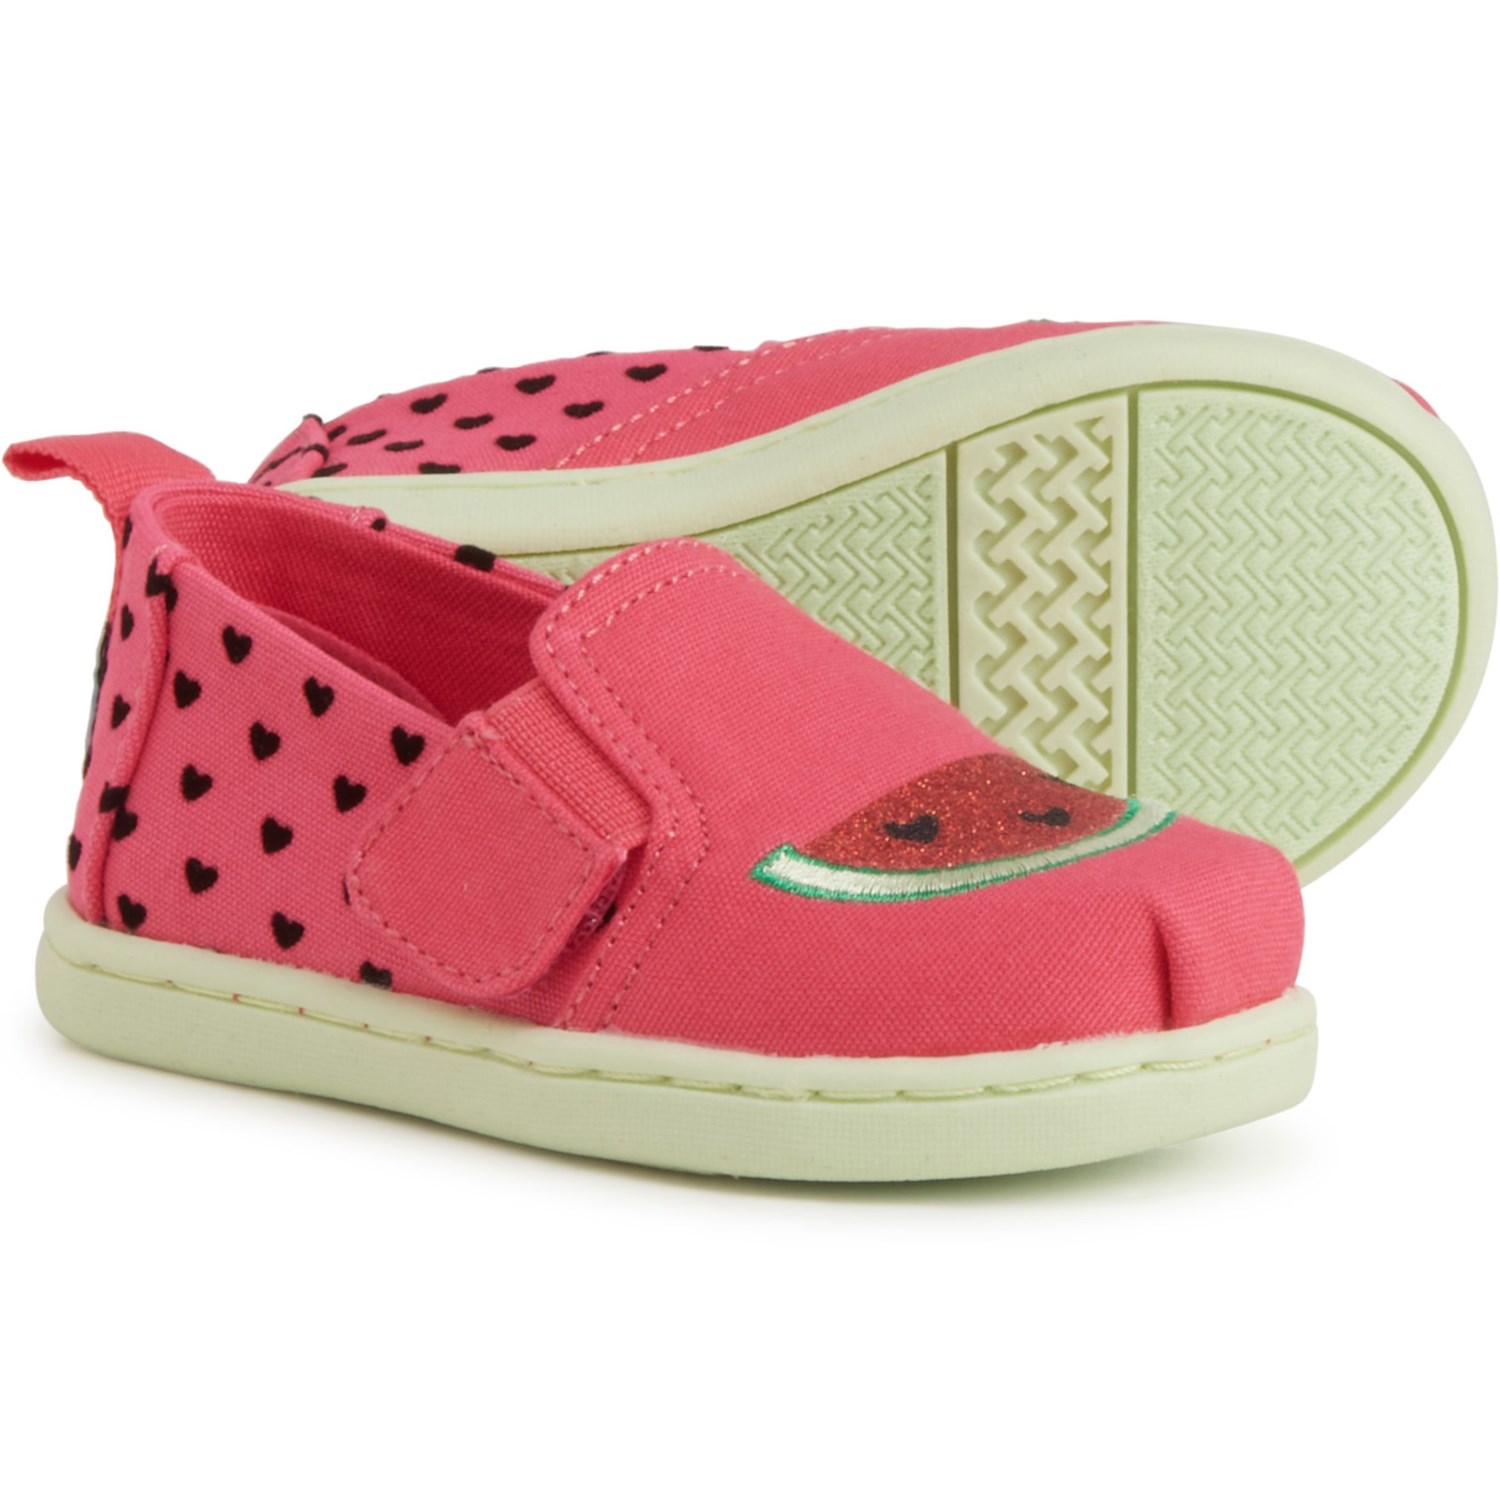 TOMS Infant and Toddler Girls Glitter Watermelon Alpargata Shoes